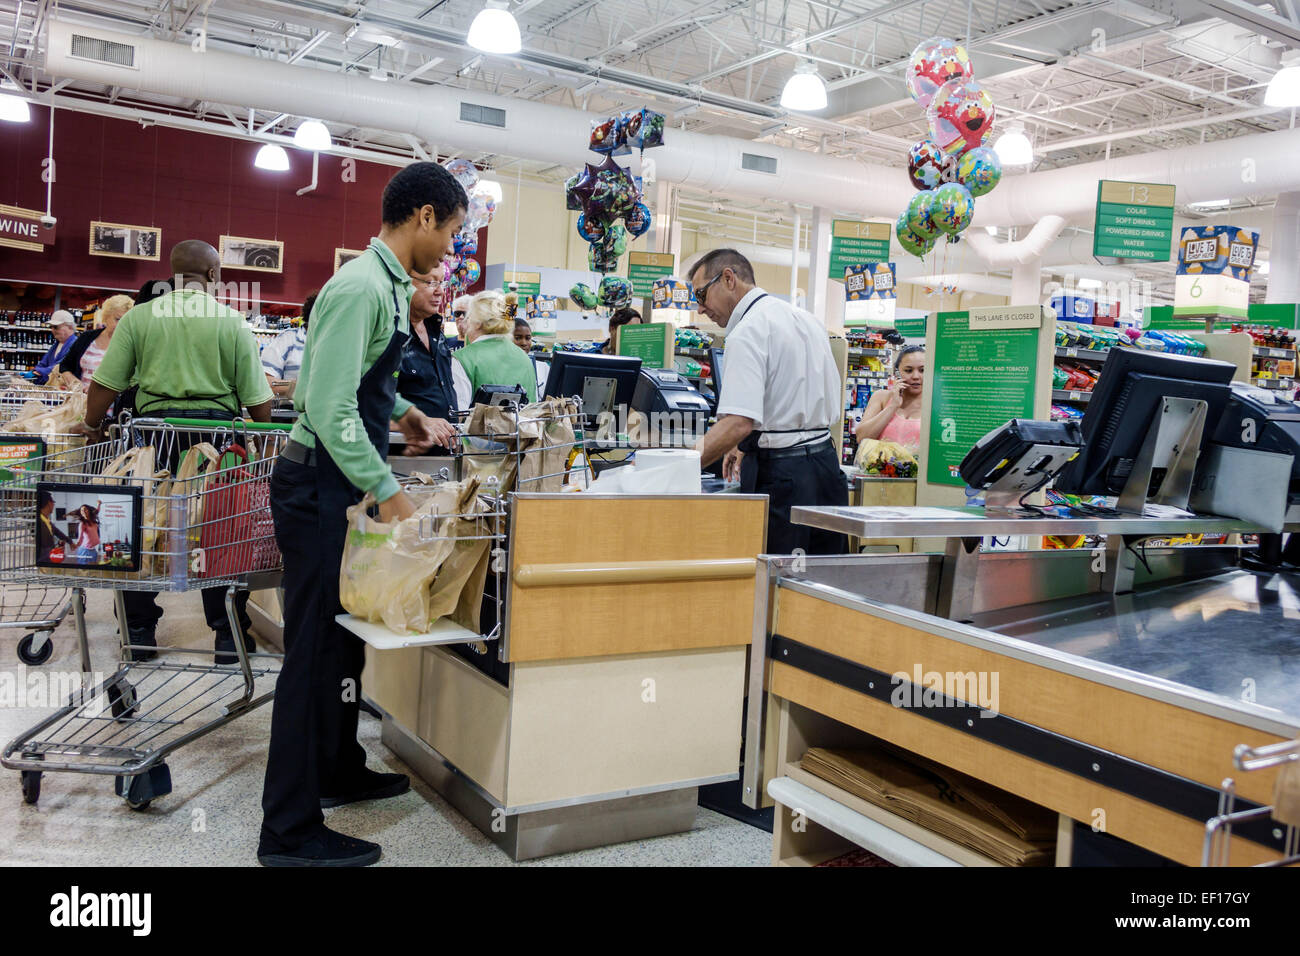 Hollywood Florida,Publix,grocery store,supermarket,sale,food,check out line,queue,employee worker workers working staff,cashier,bagger,working,job,FL1 Stock Photo